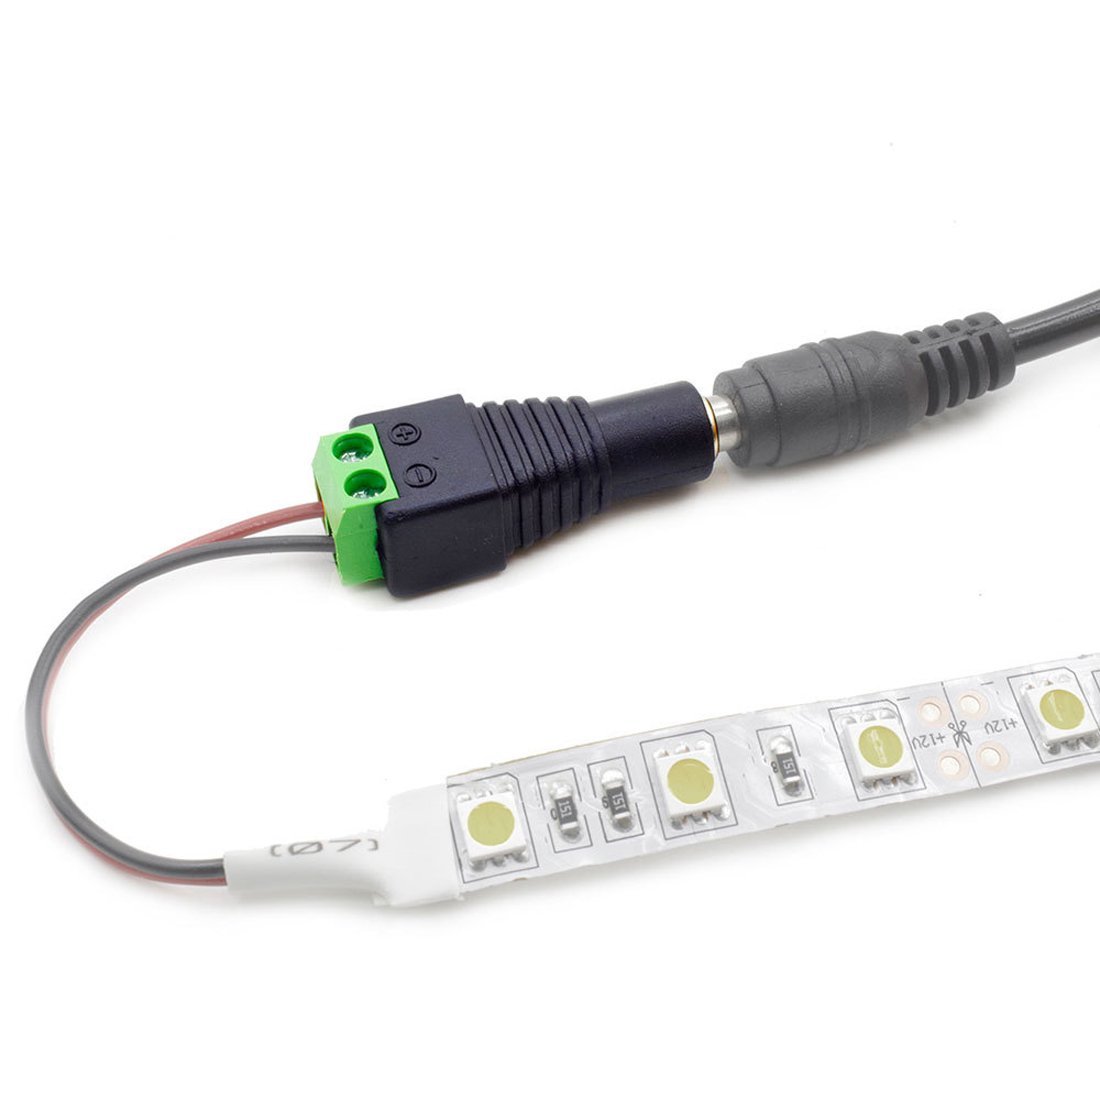 55-x-21mm-Power-Adapter-Cable-Connector-with-On-Off-Switch-for-5050-3528-LED-Strip-Light-DC12V-1260139